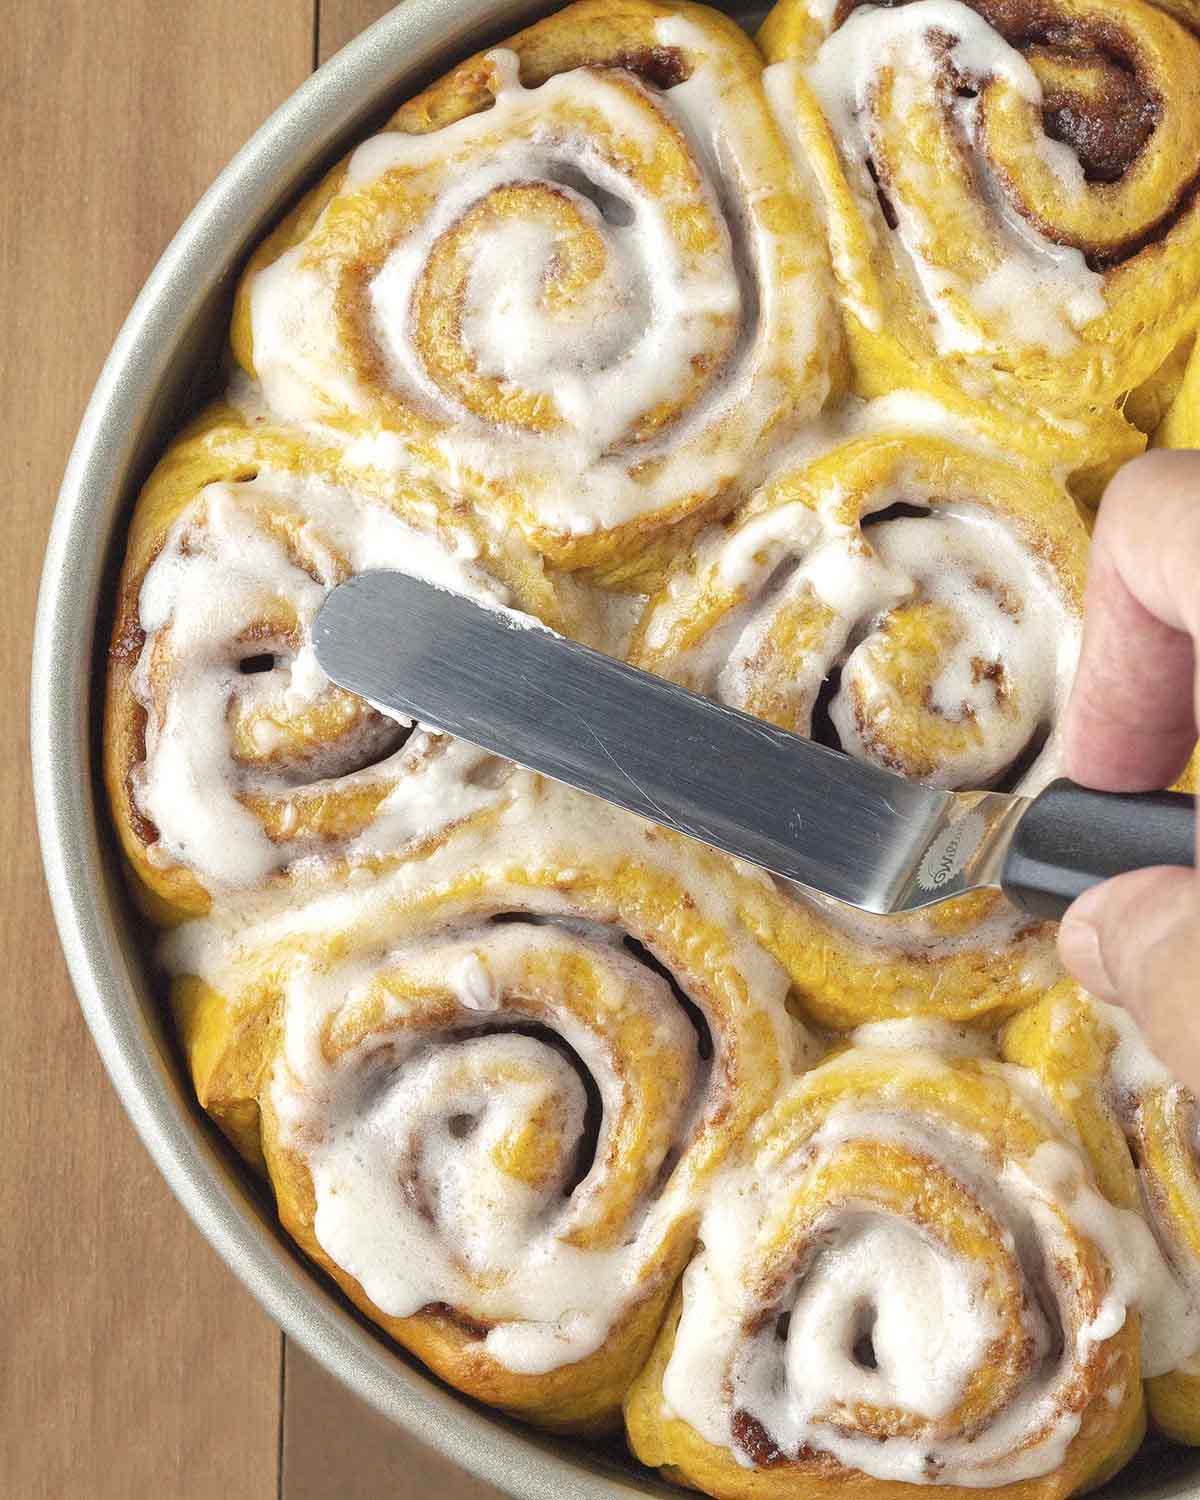 A hand frosting a pan of freshly baked vegan pumpkin cinnamon rolls with a small offset spatula.